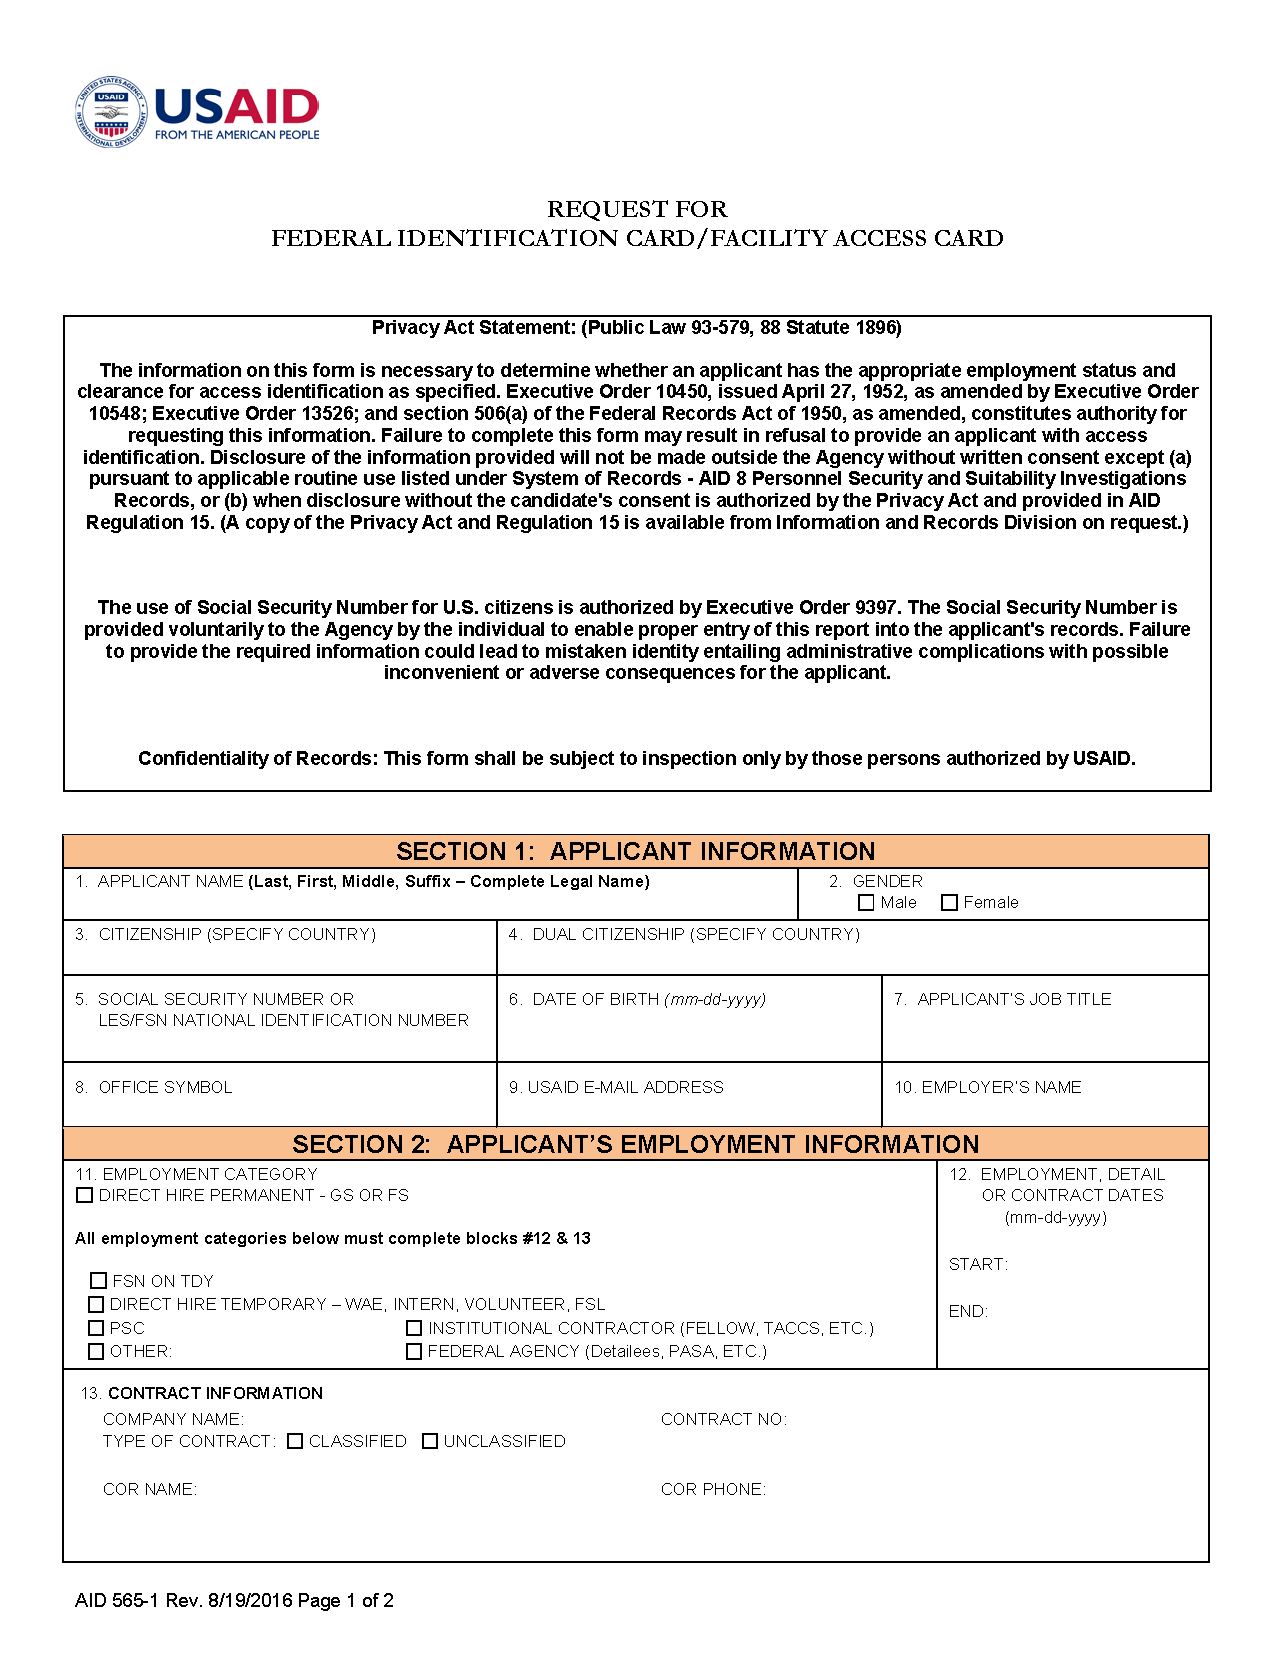 AID 565-1 (Request for Federal Identification Card / Facility Access Card)